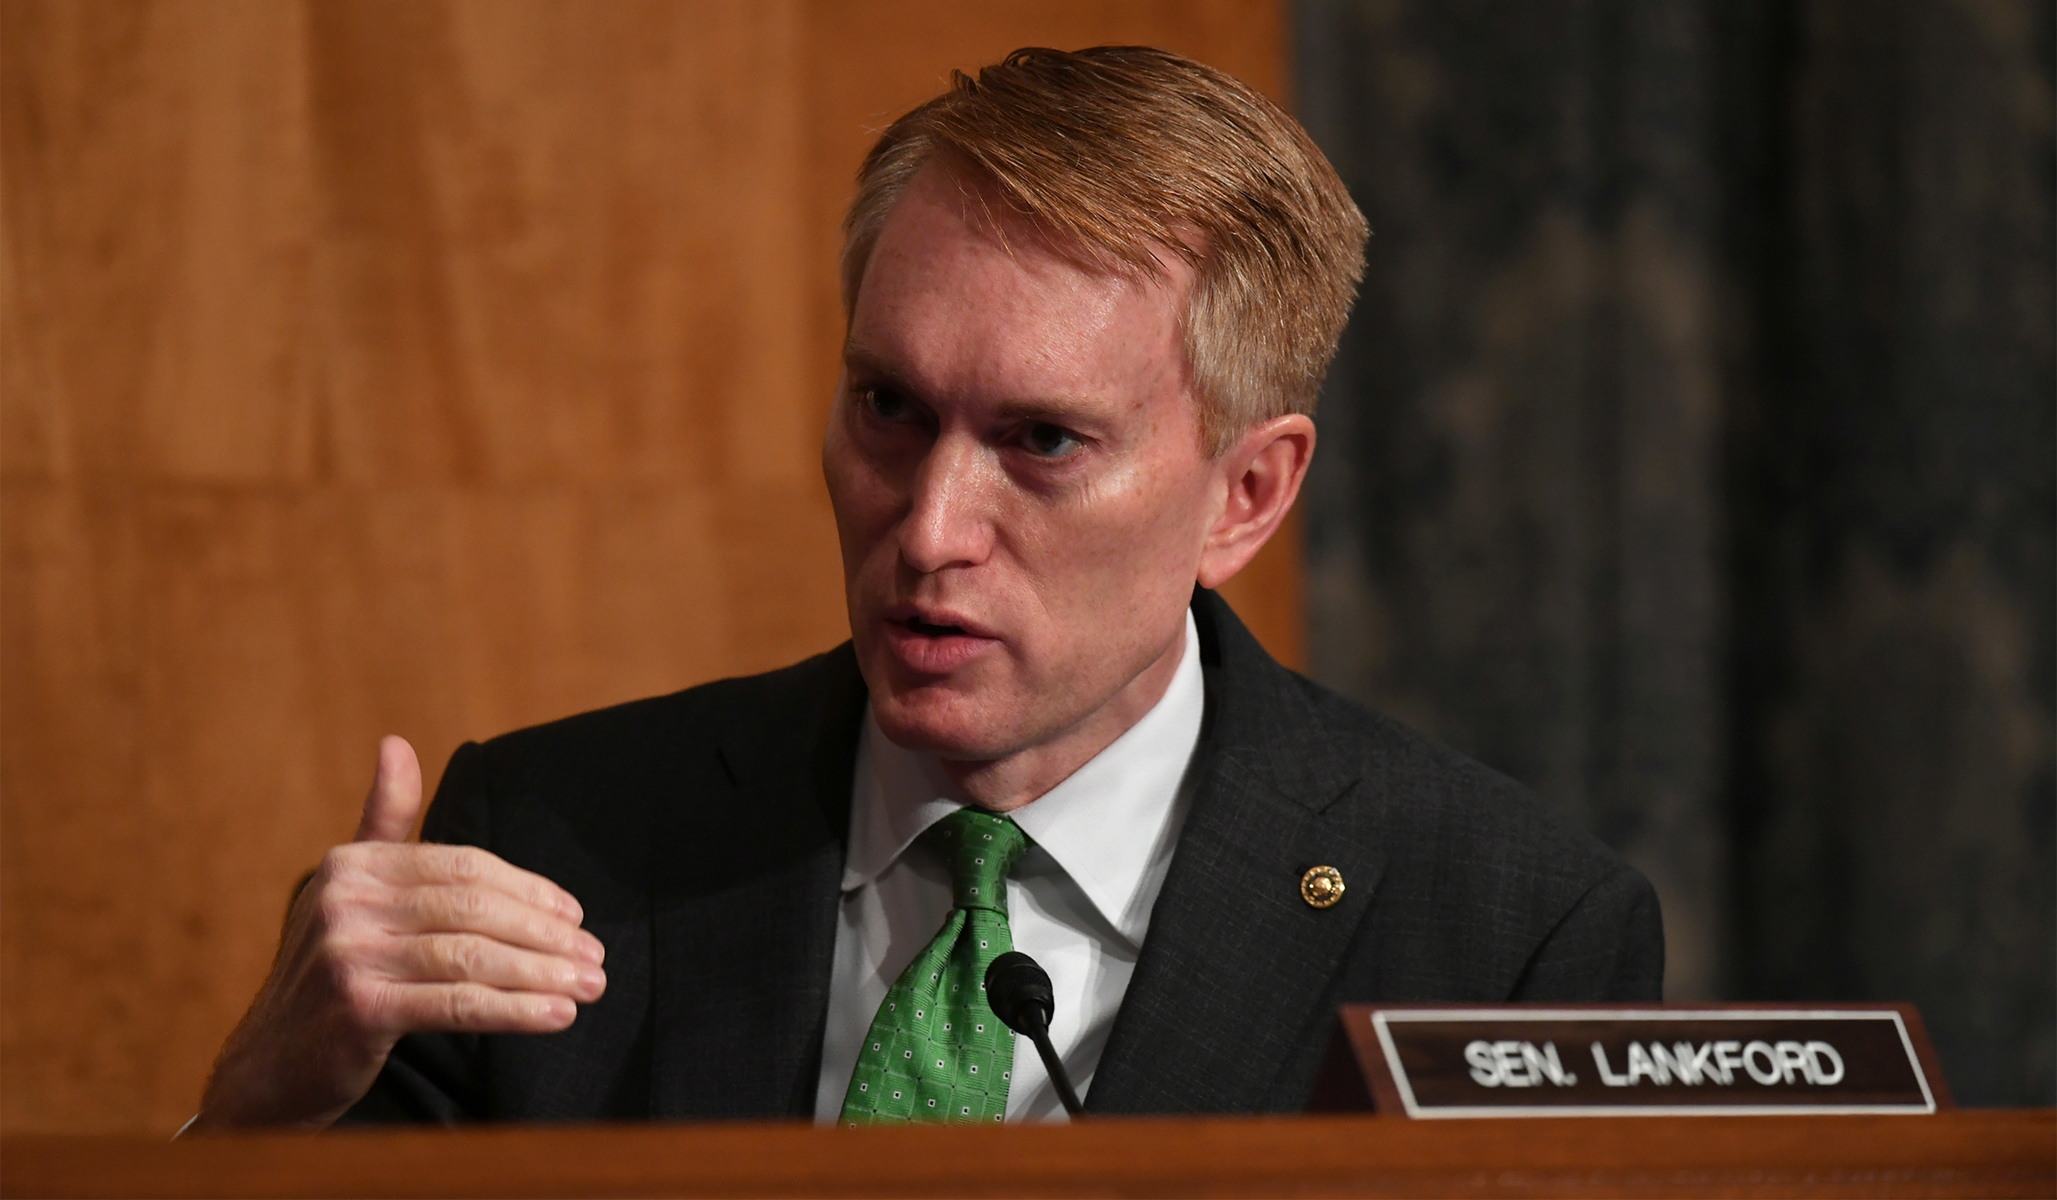 Trump Transition: Sen. Lankford Will Intervene if Trump Doesn't Begin Transition by Friday | National Review